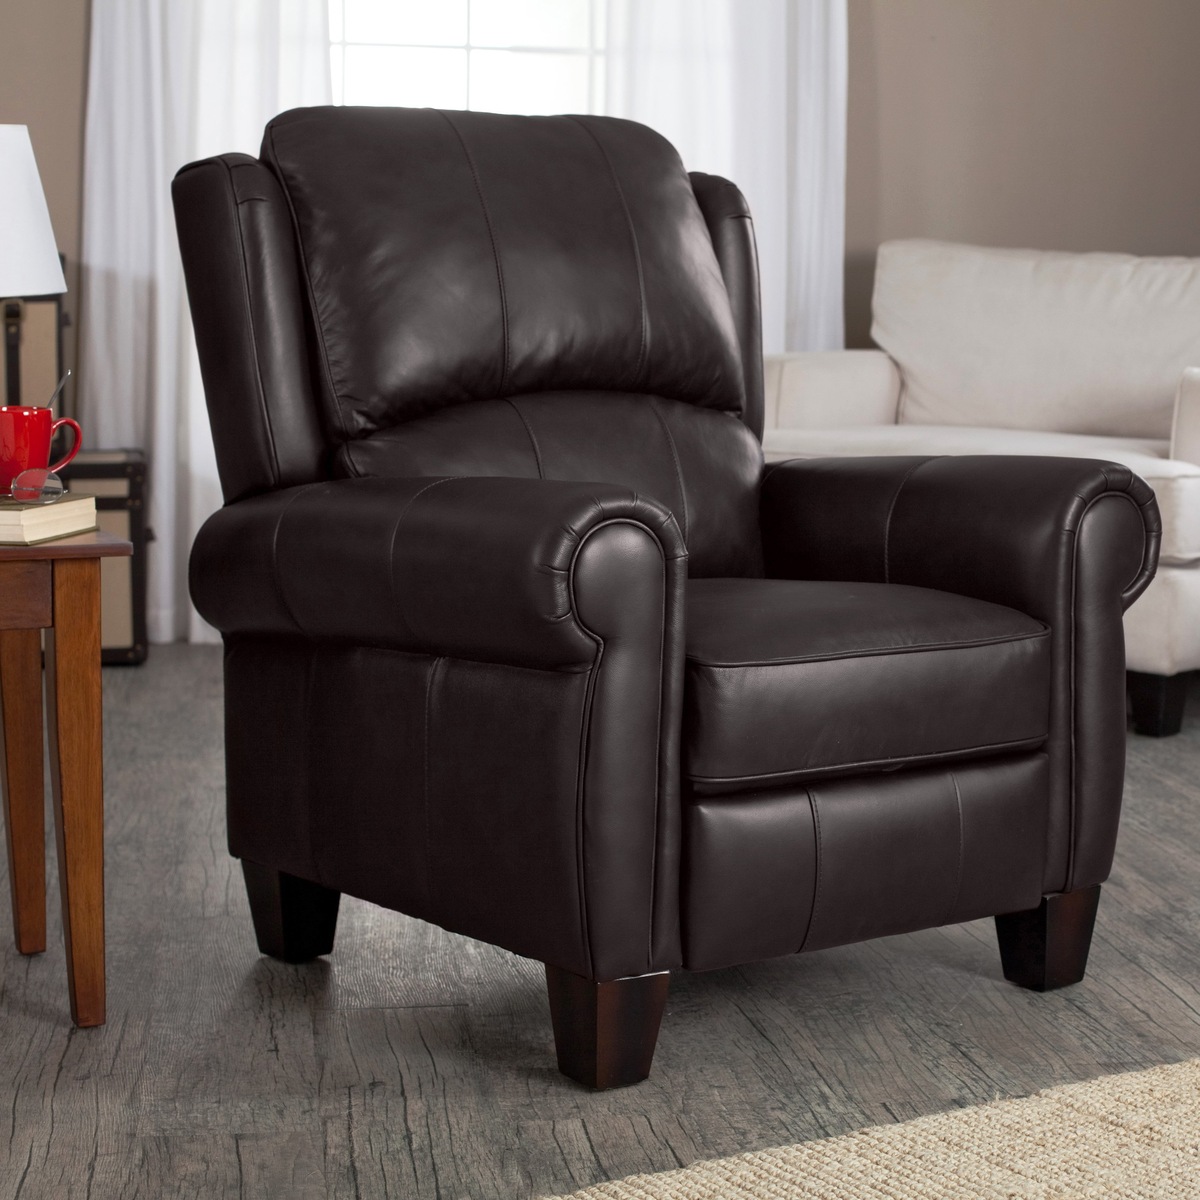 How To Keep Recliner From Sliding On Wood Floor